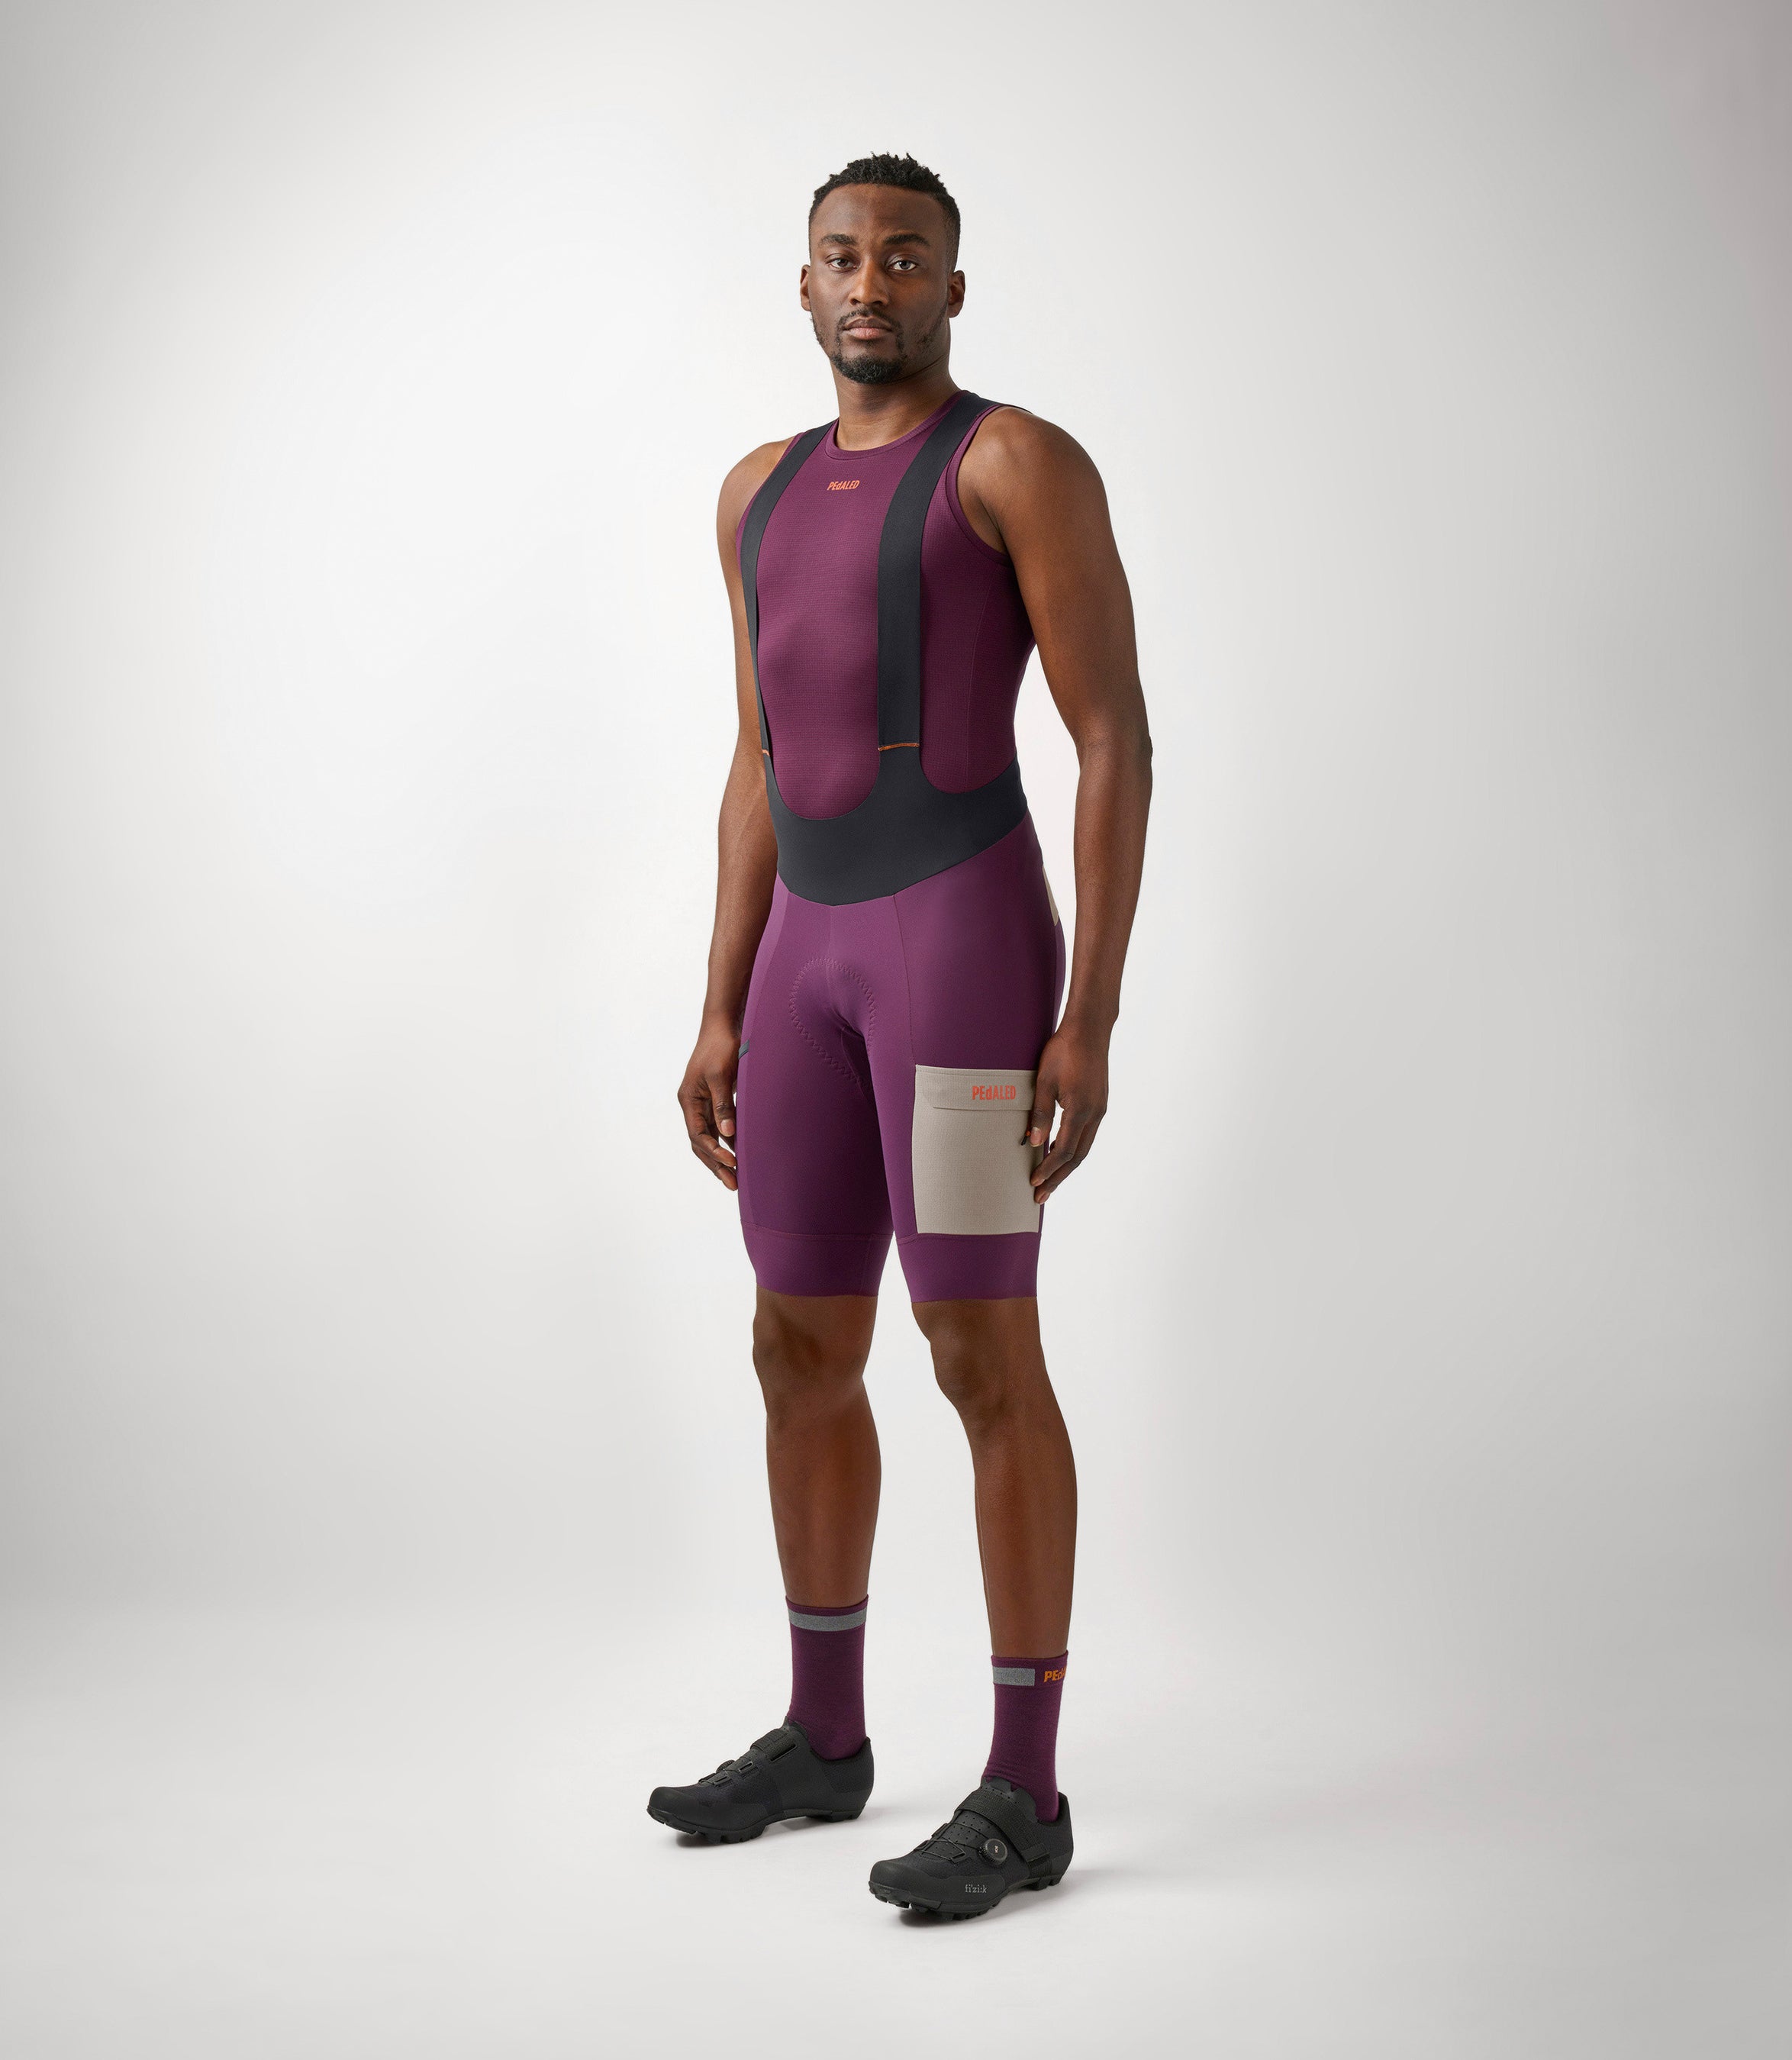 23SBLOD10PE_3_men base layer powerdry purple odyssey total body front pedaled